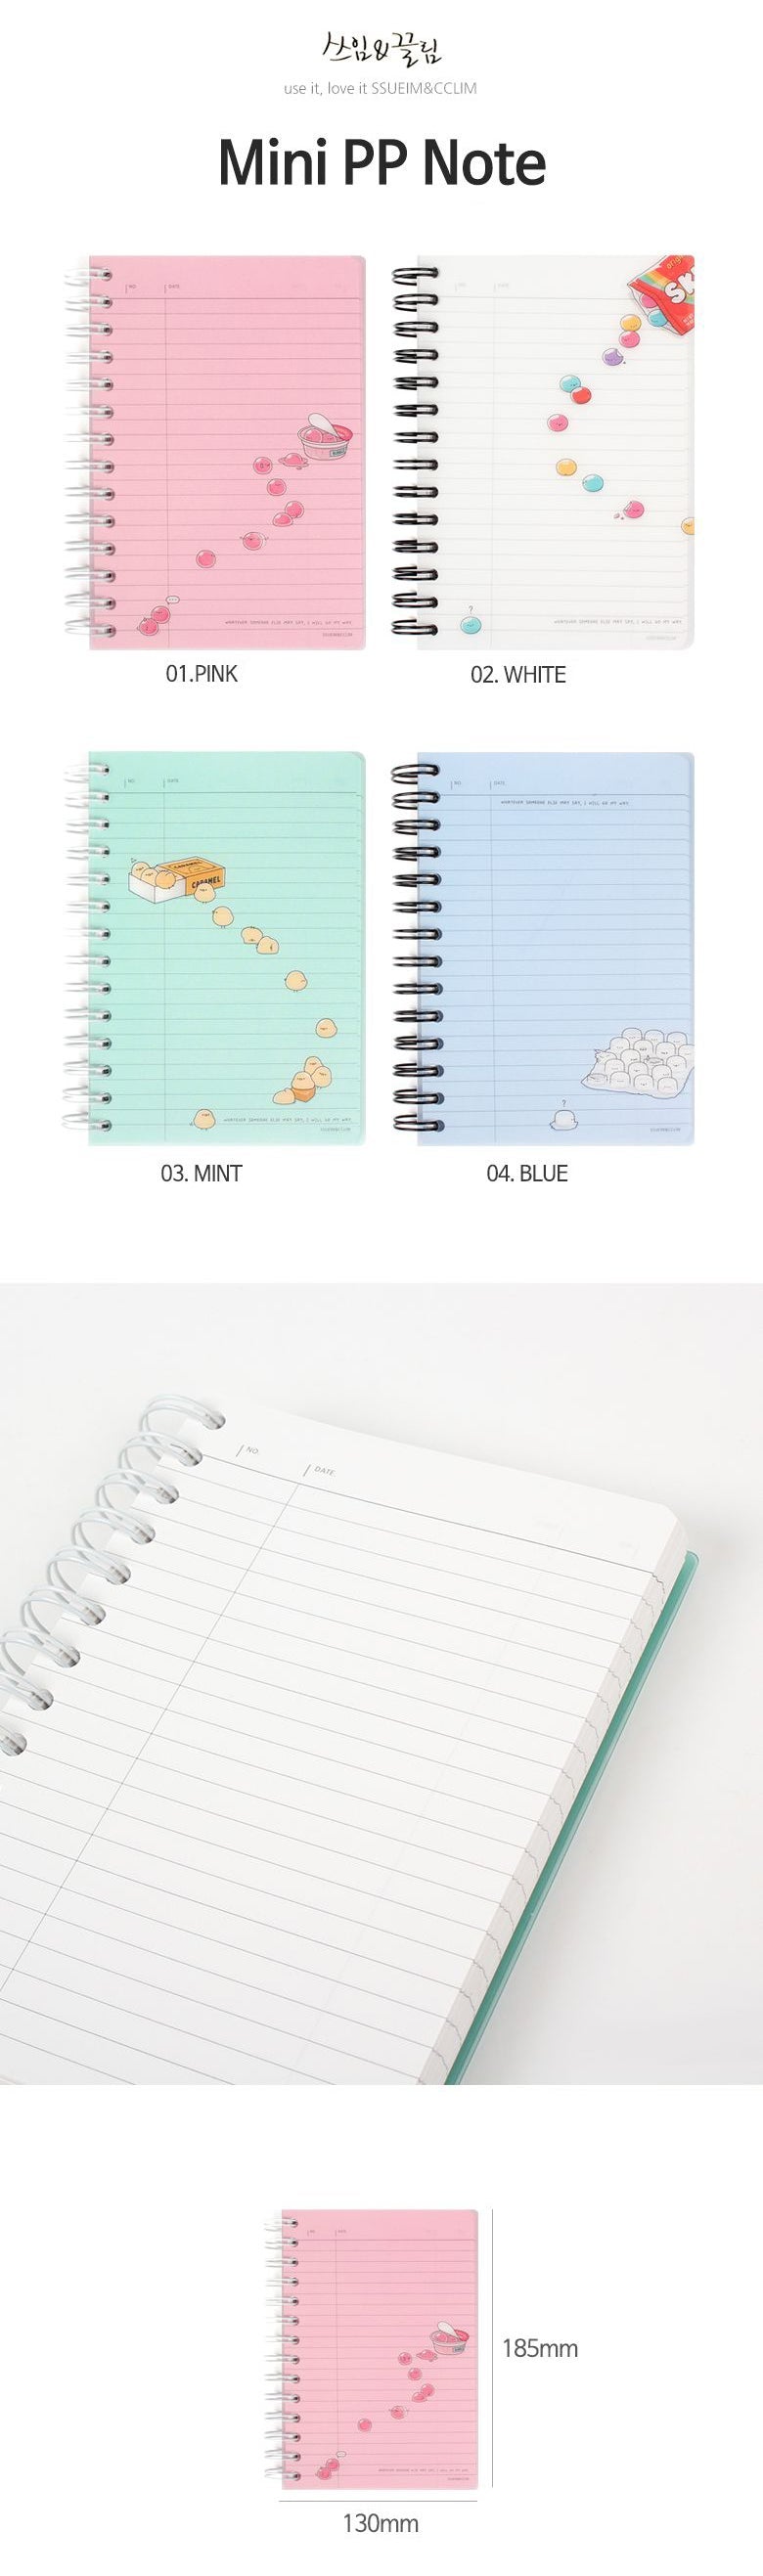 Ssueim & Cclim MongAlMongAl Mini PP Notebook (Lined)